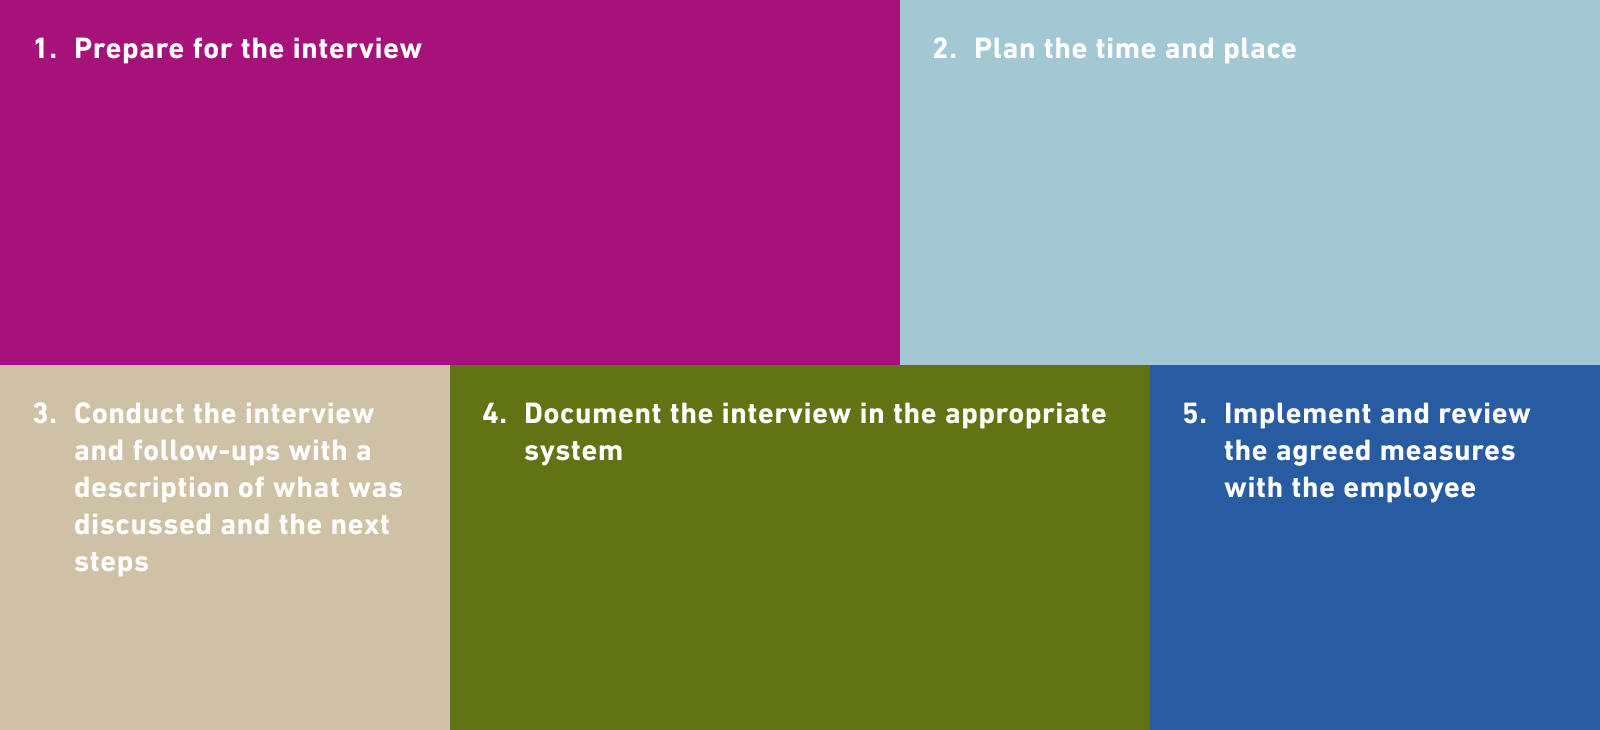 1. Prepare for the interview 2. Schedule the time and venue 3. Conduct the interview and follow-ups with a description of what was discussed and the next steps 4. Document the interview in the appropriate system 5. Implement and review the agreed measures with the employee